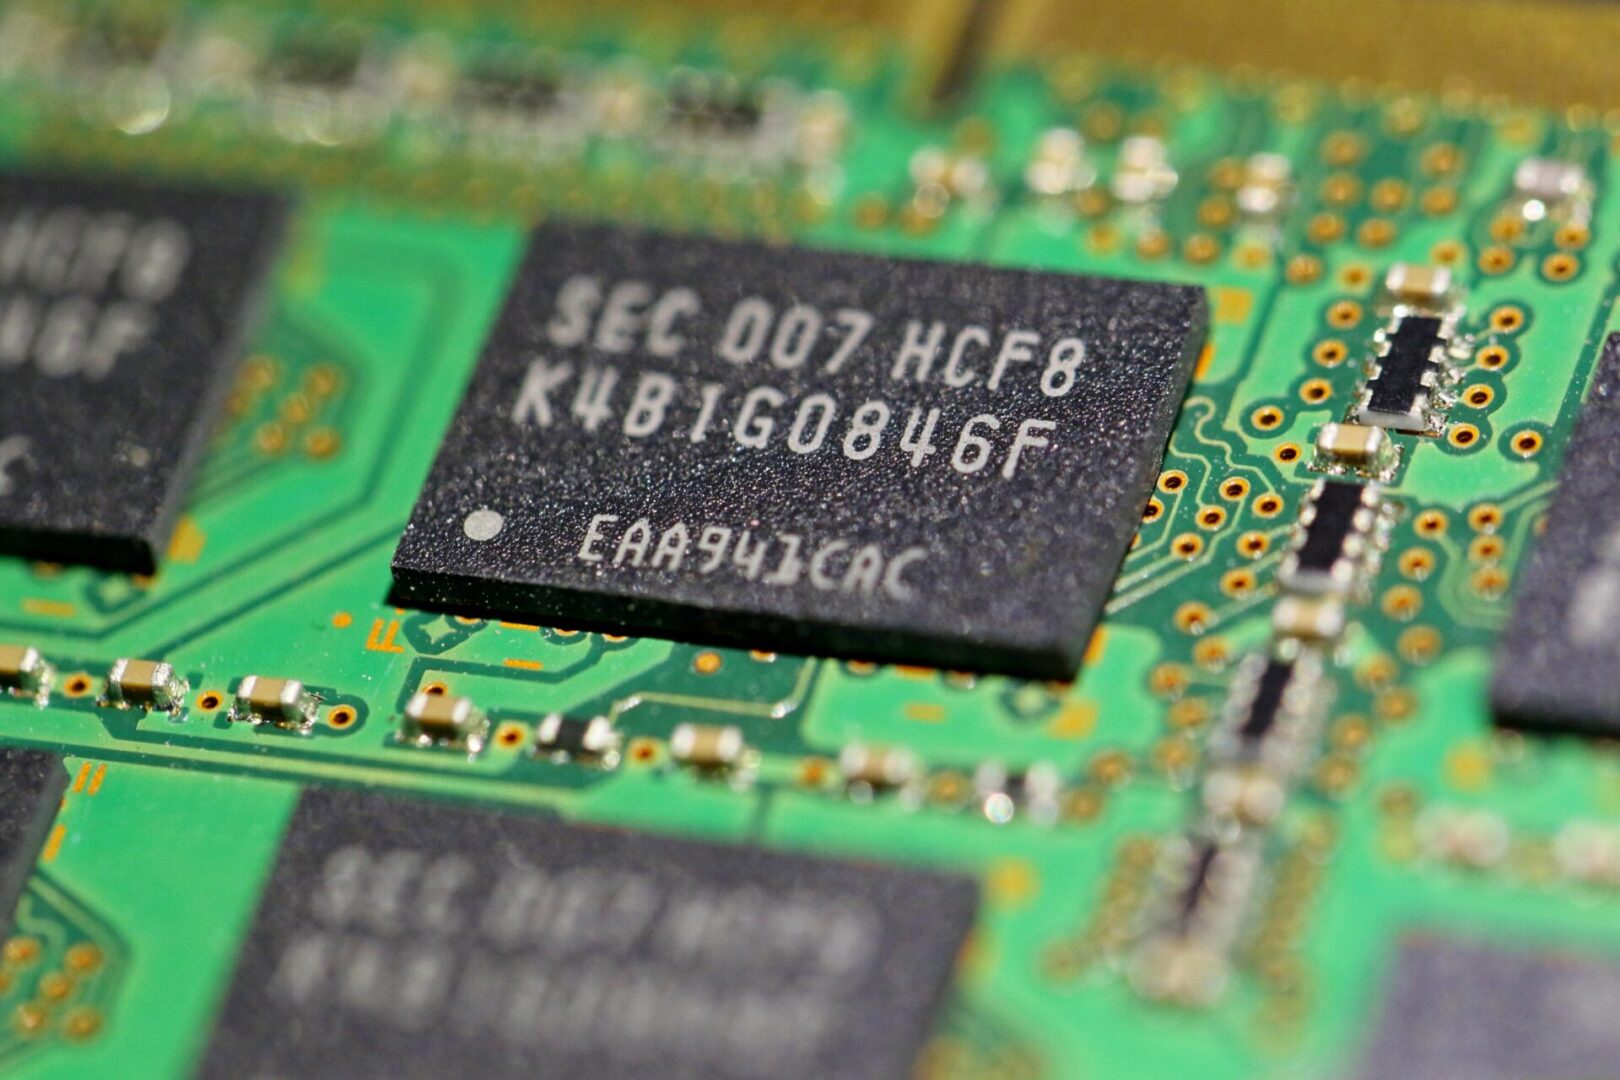 A close up of the chip on an electronic device.